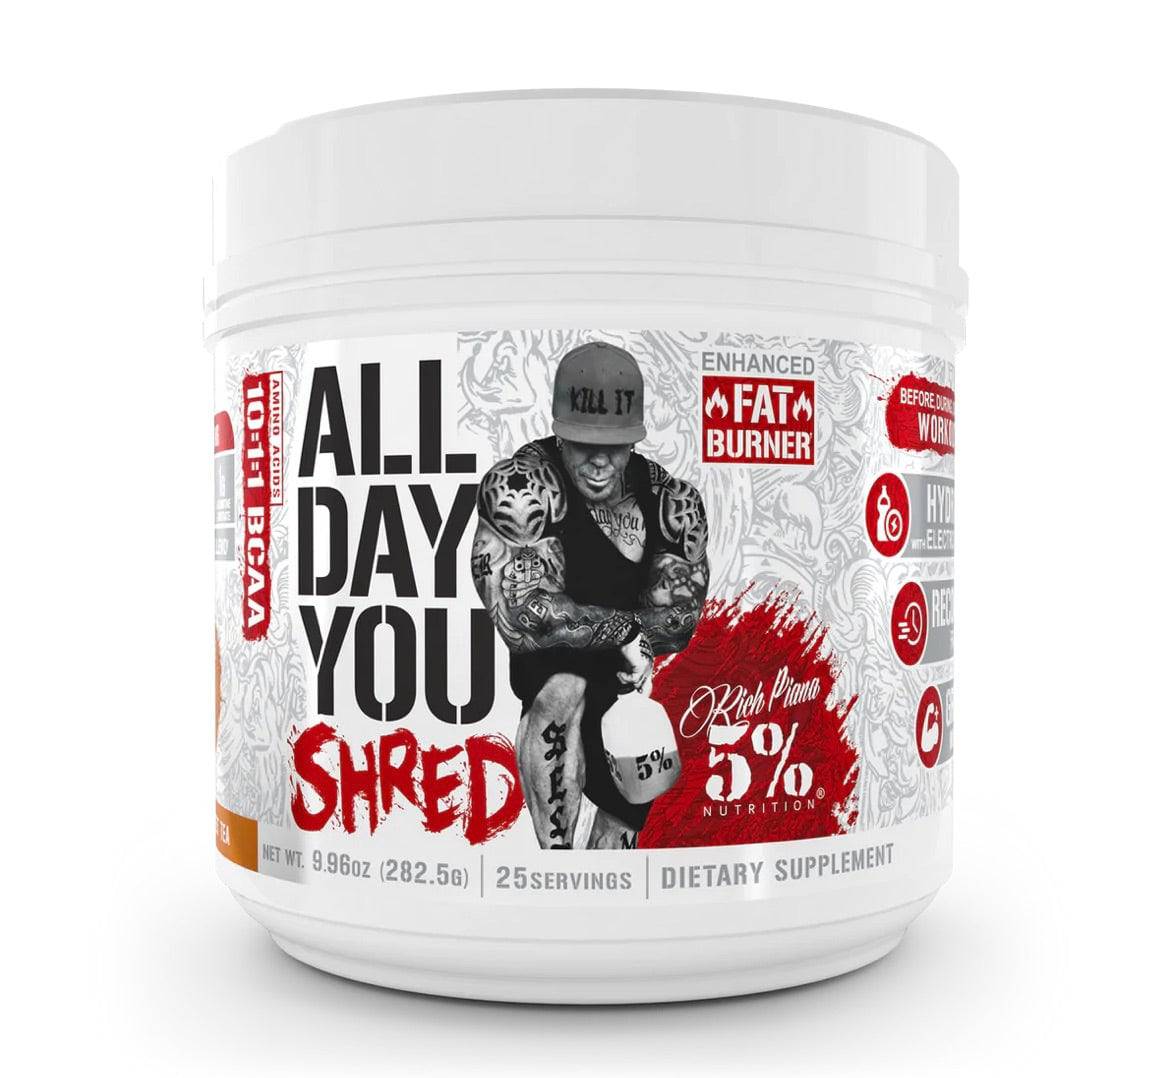 All Day You Shred - Prime Sports Nutrition